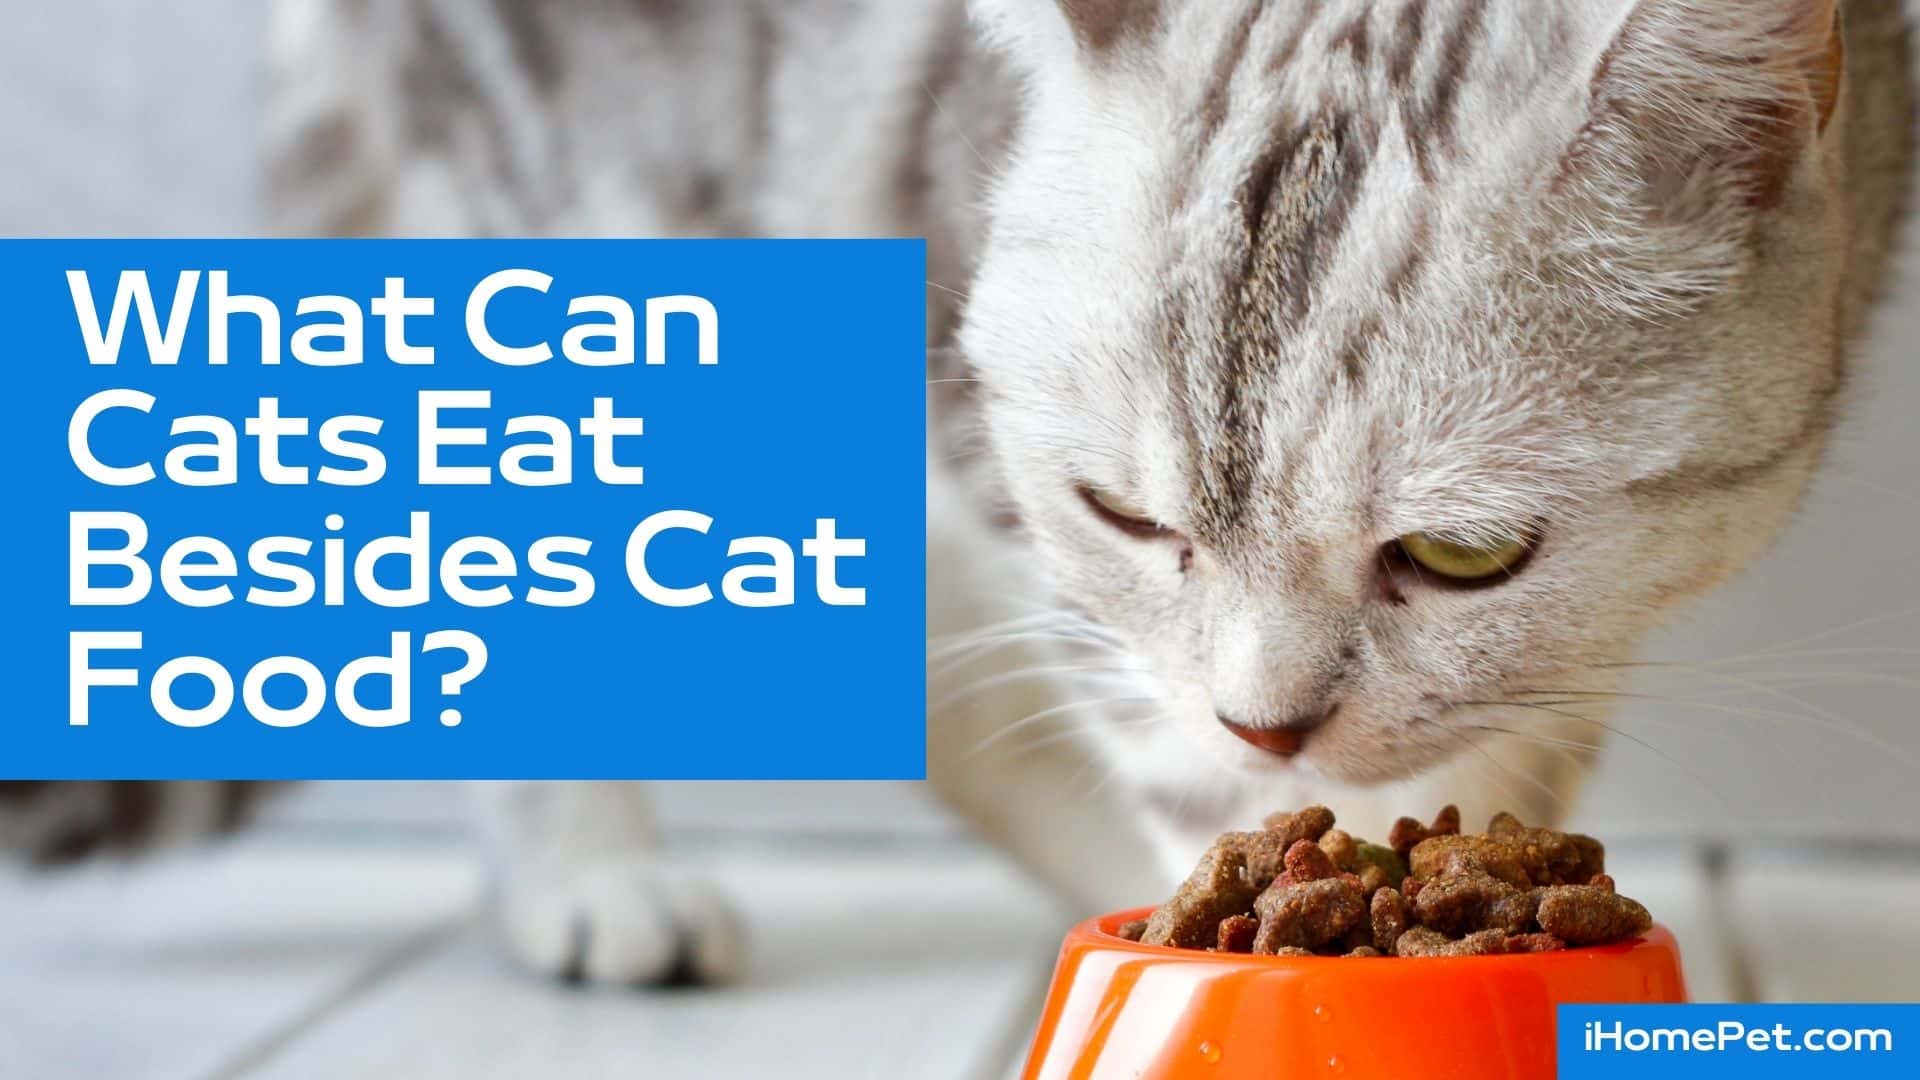 What human foods can your feed your cat as pet parents